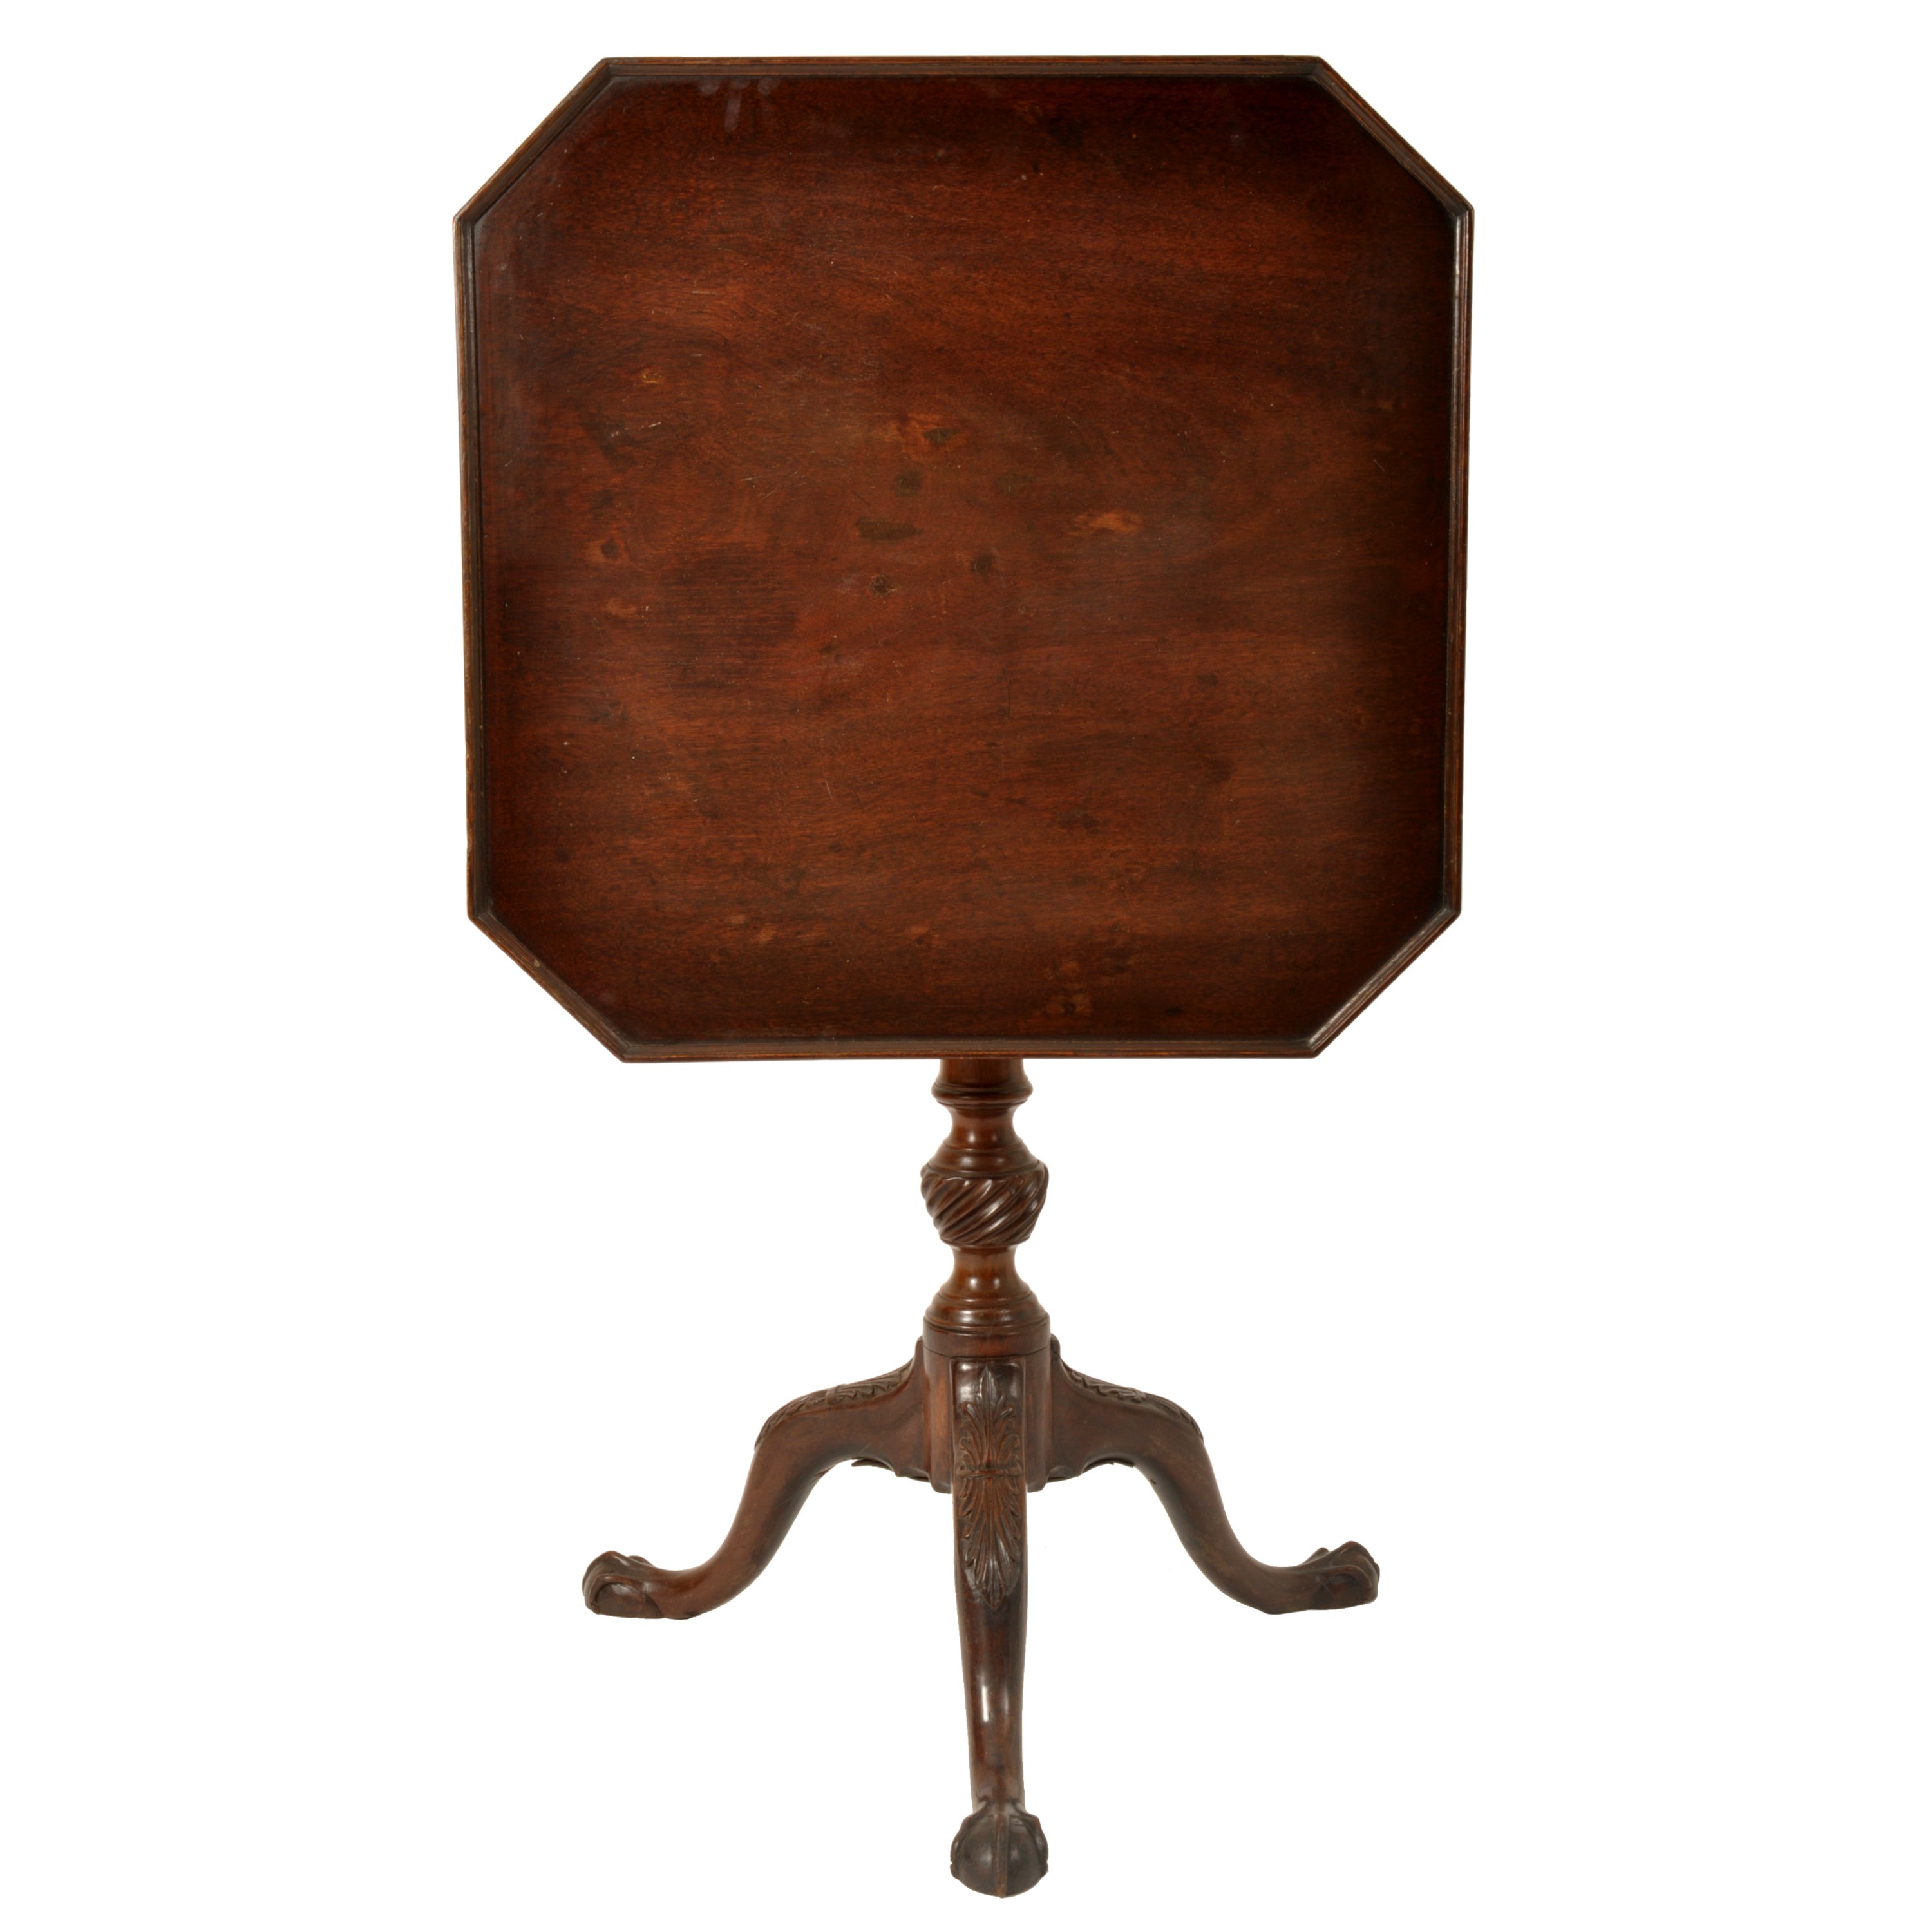 A good antique 18th century carved Chippendale George III tilt-top wine/side table, circa 1790.
The table having an octagonal top with a raised tray top, the tilt-top locks onto a bird-cage armature, allowing the top to spin around. The table stands